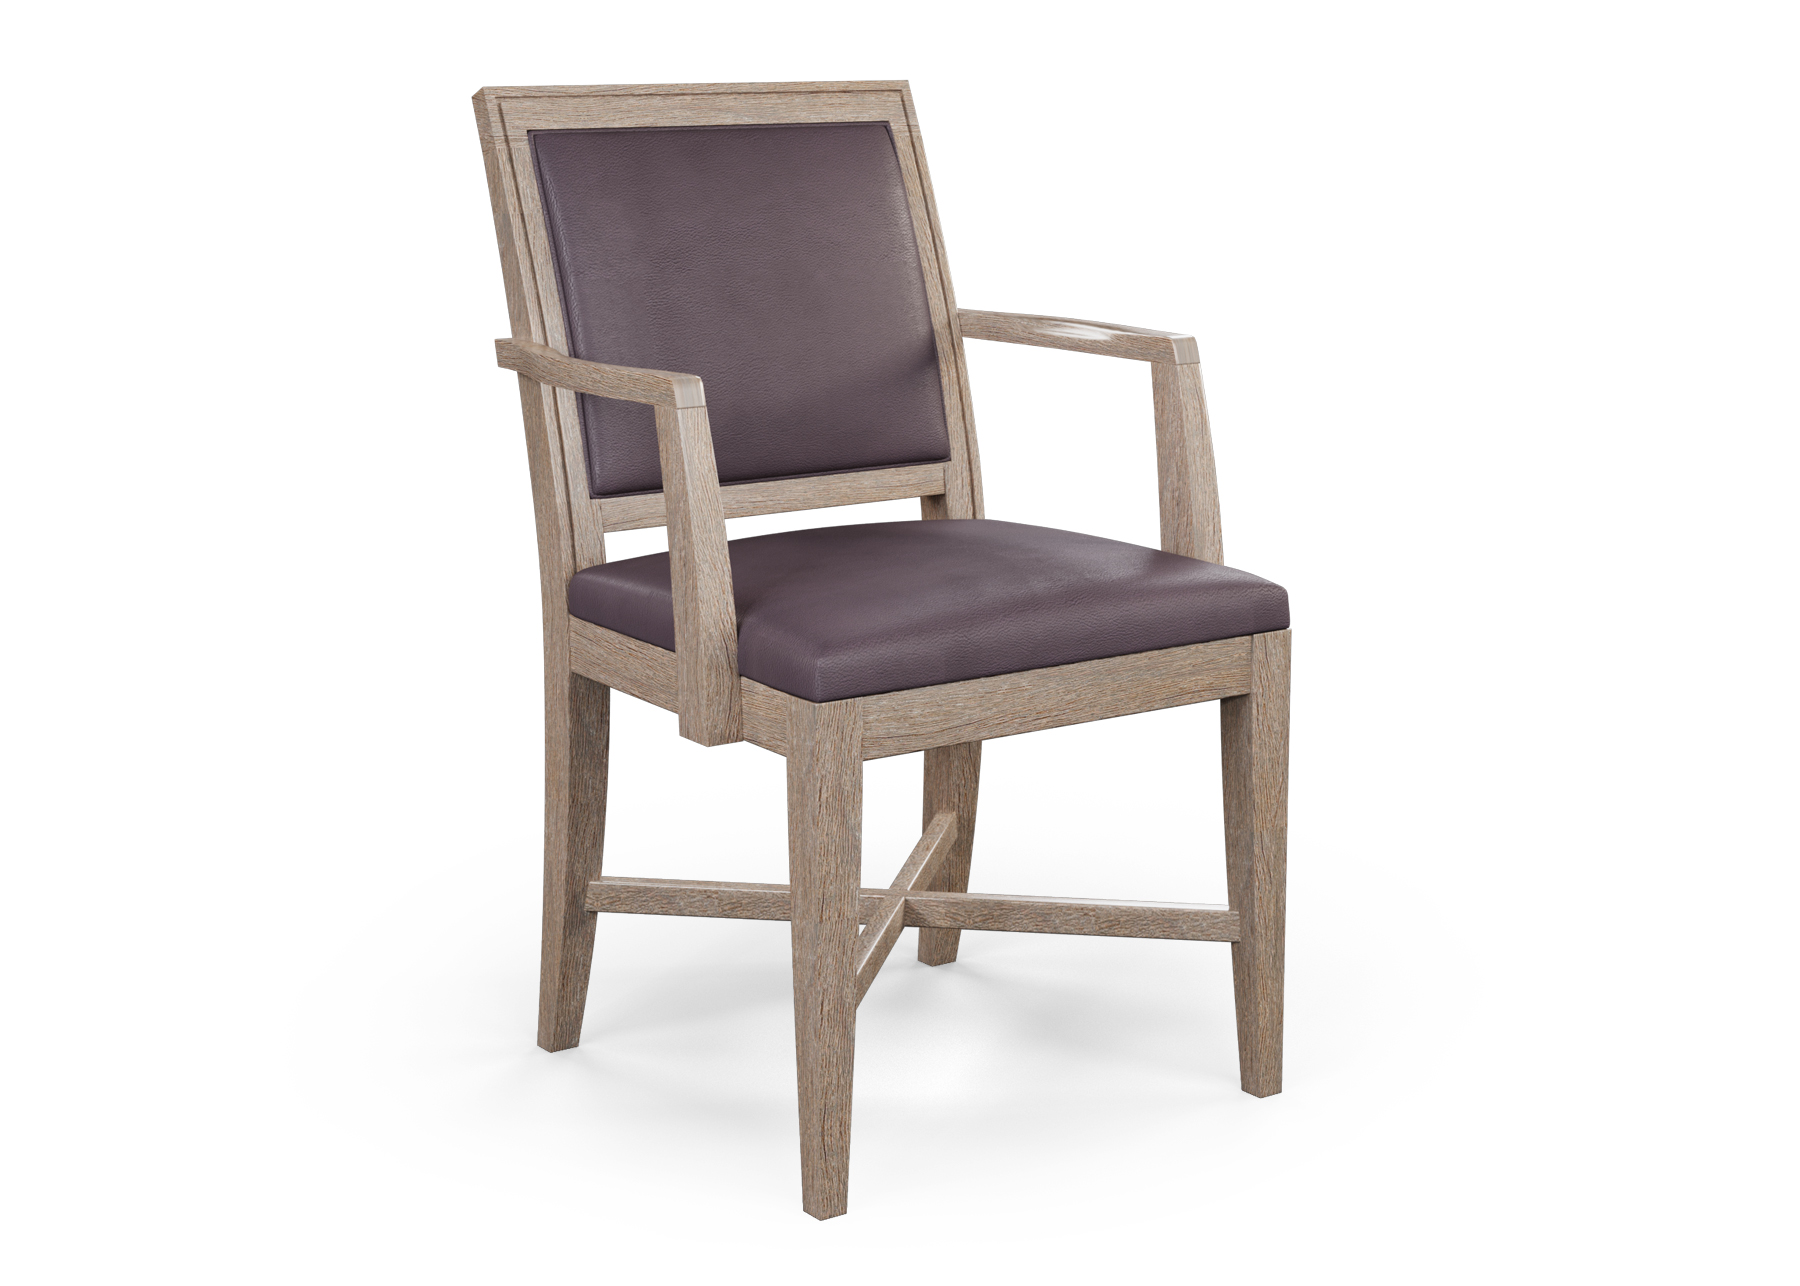  VOYAGE ARM CHAIR